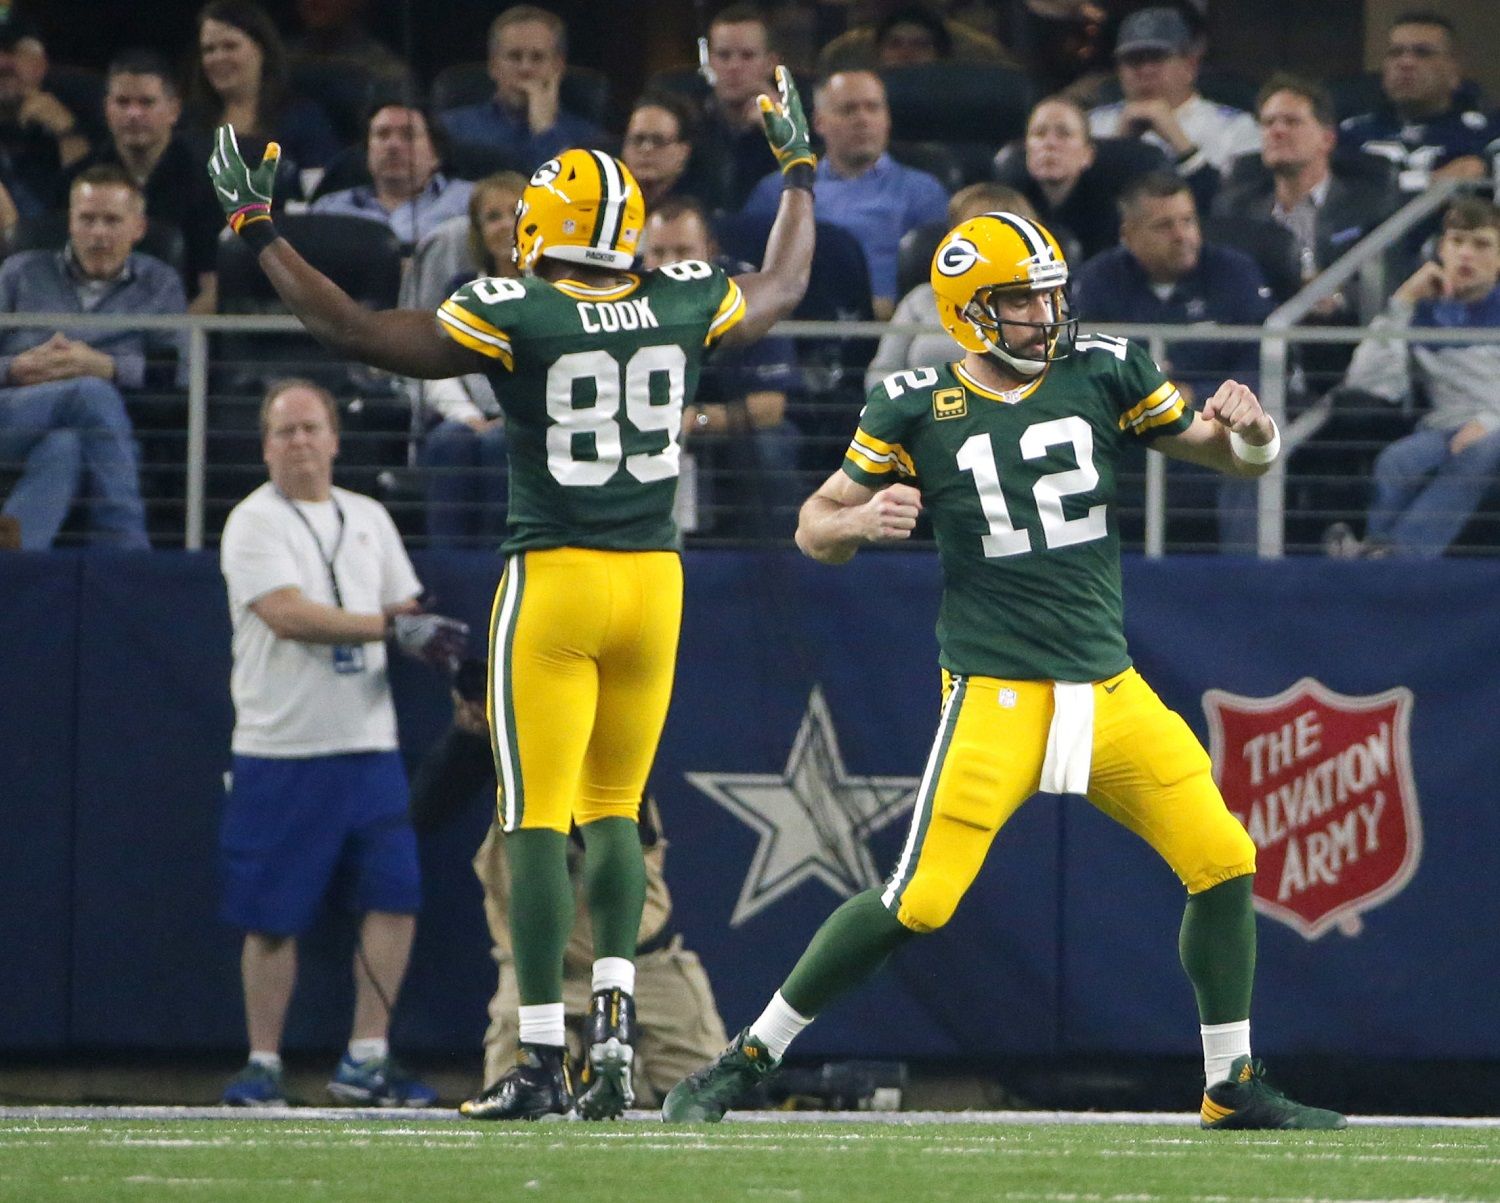 Green Bay Packers quarterback Aaron Rodgers (12) and Jared Cook (89) celebrate after a touchdown during the first half of an NFL divisional playoff football game against the Dallas Cowboys Sunday, Jan. 15, 2017, in Arlington, Texas. (AP Photo/Tony Gutierrez)